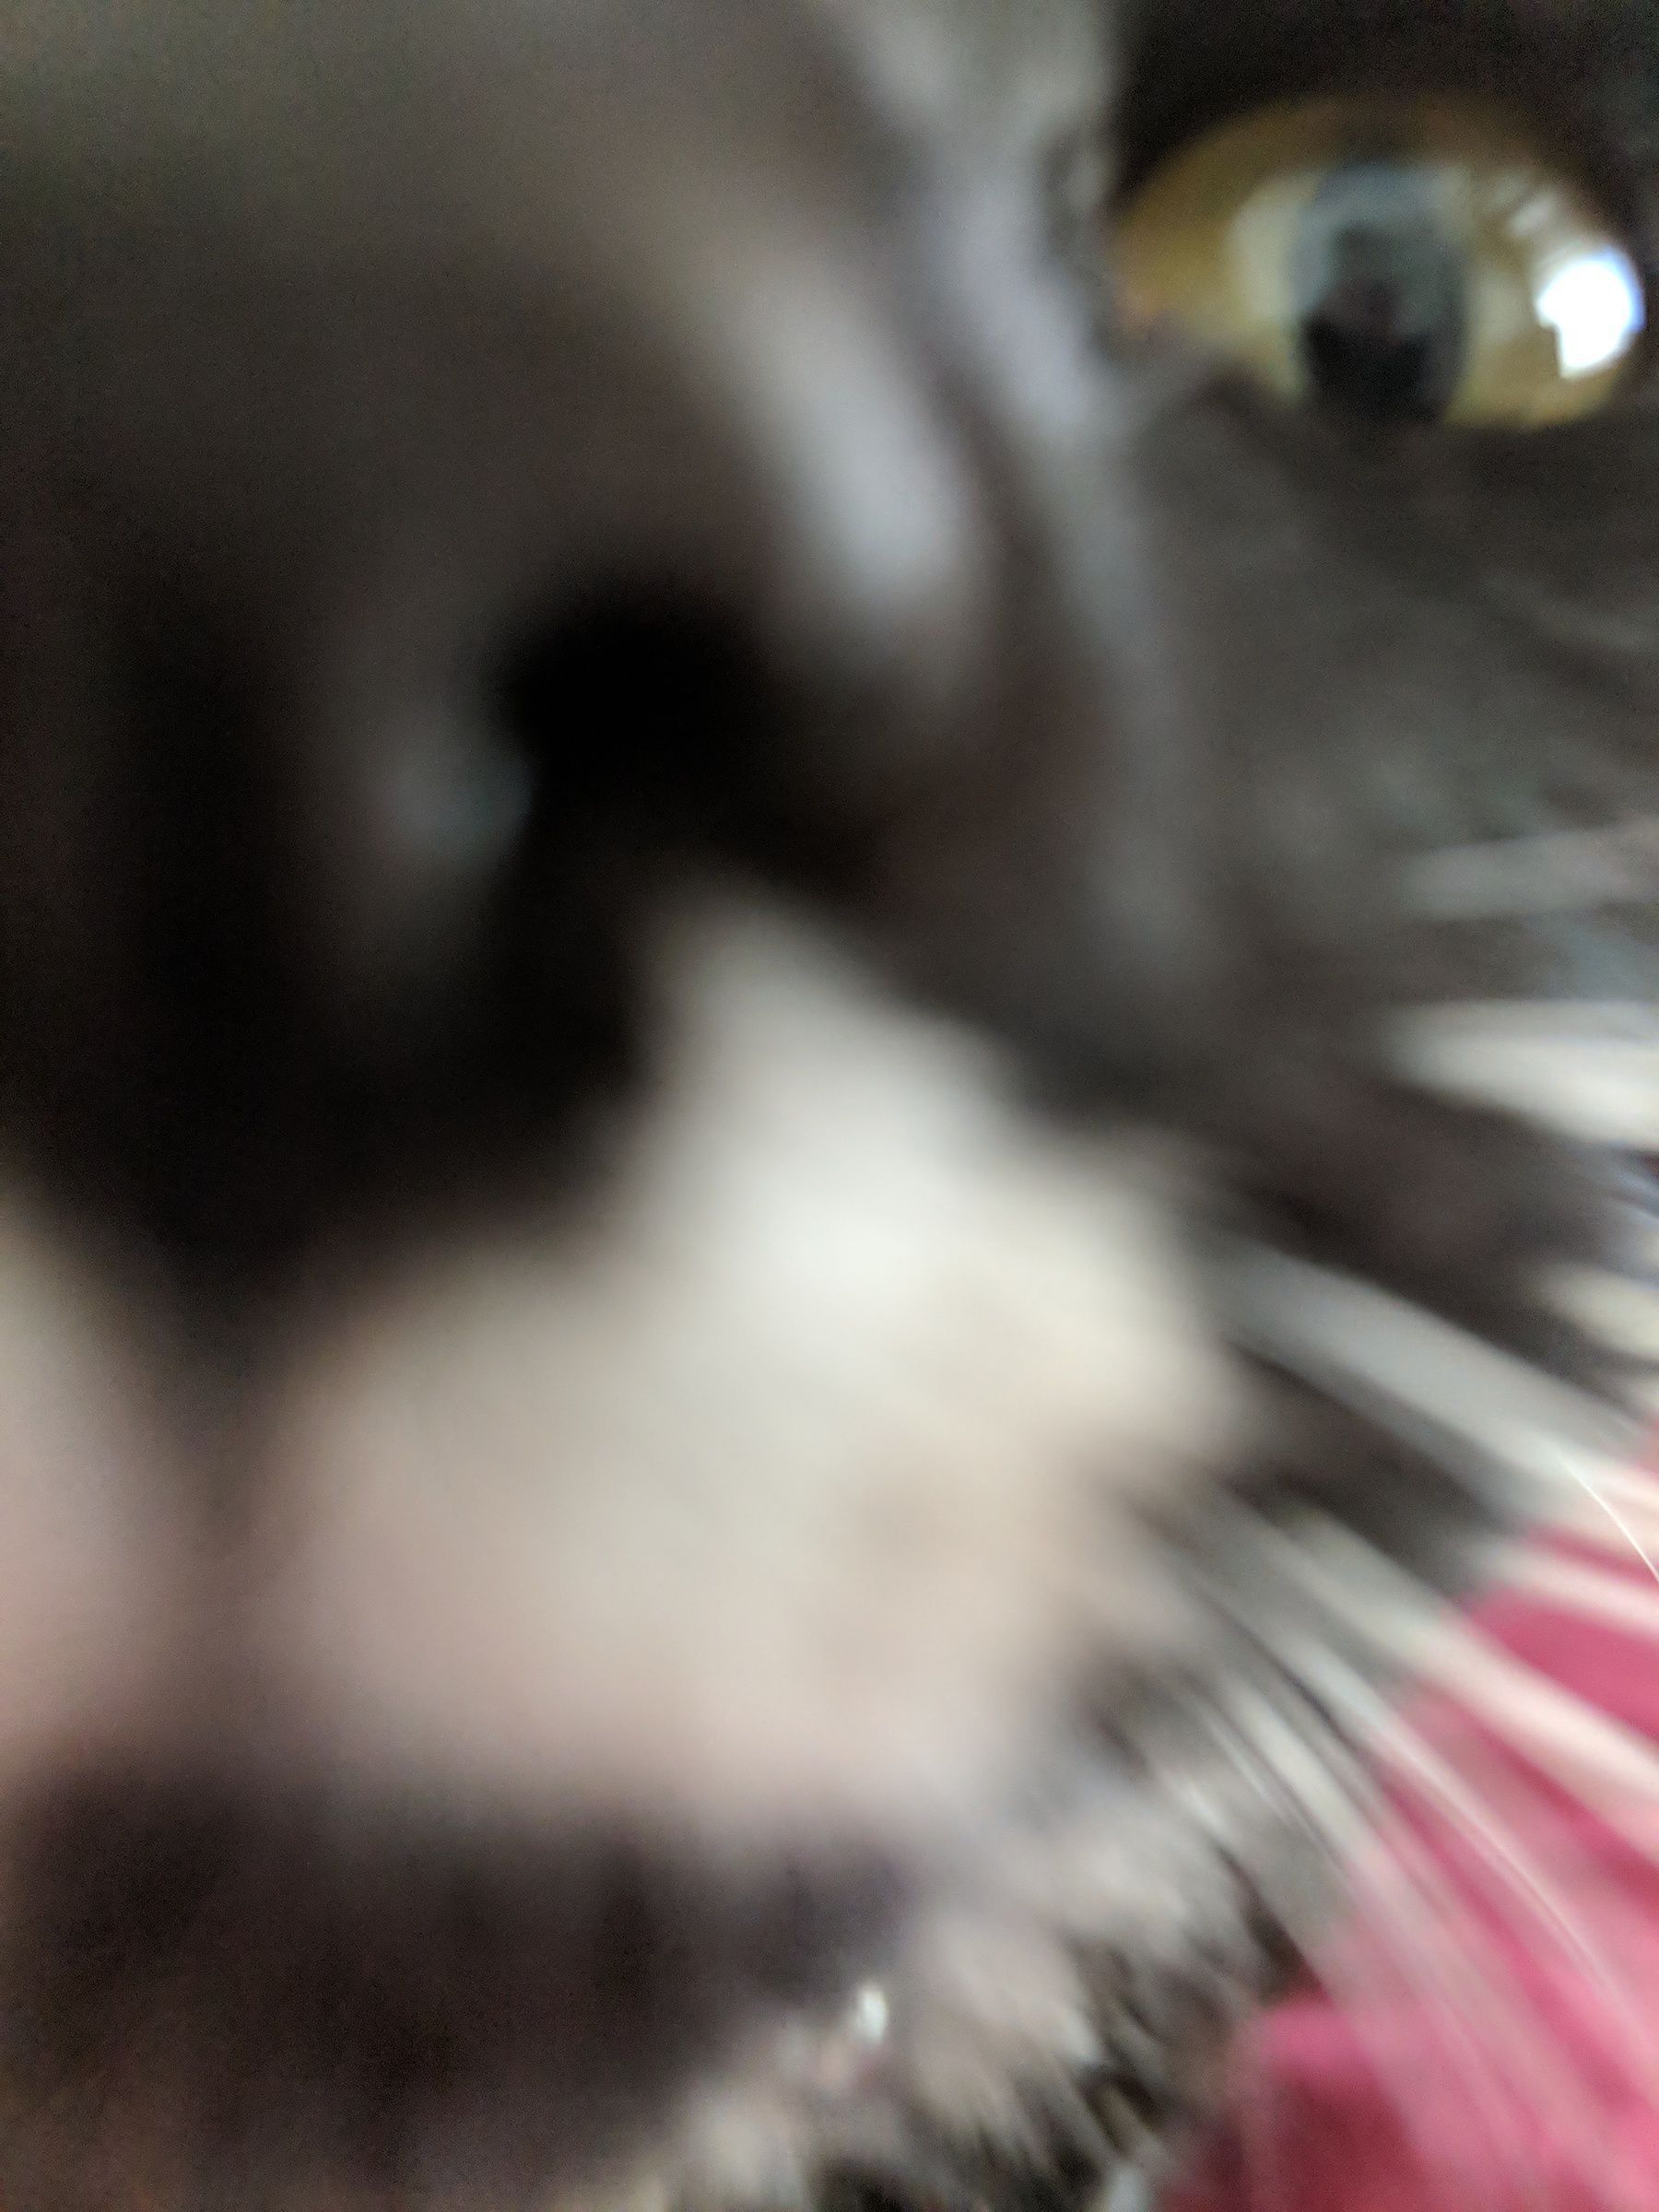 A blurry black and white cat, very close to the camera so that her nose is almost touching the lens.